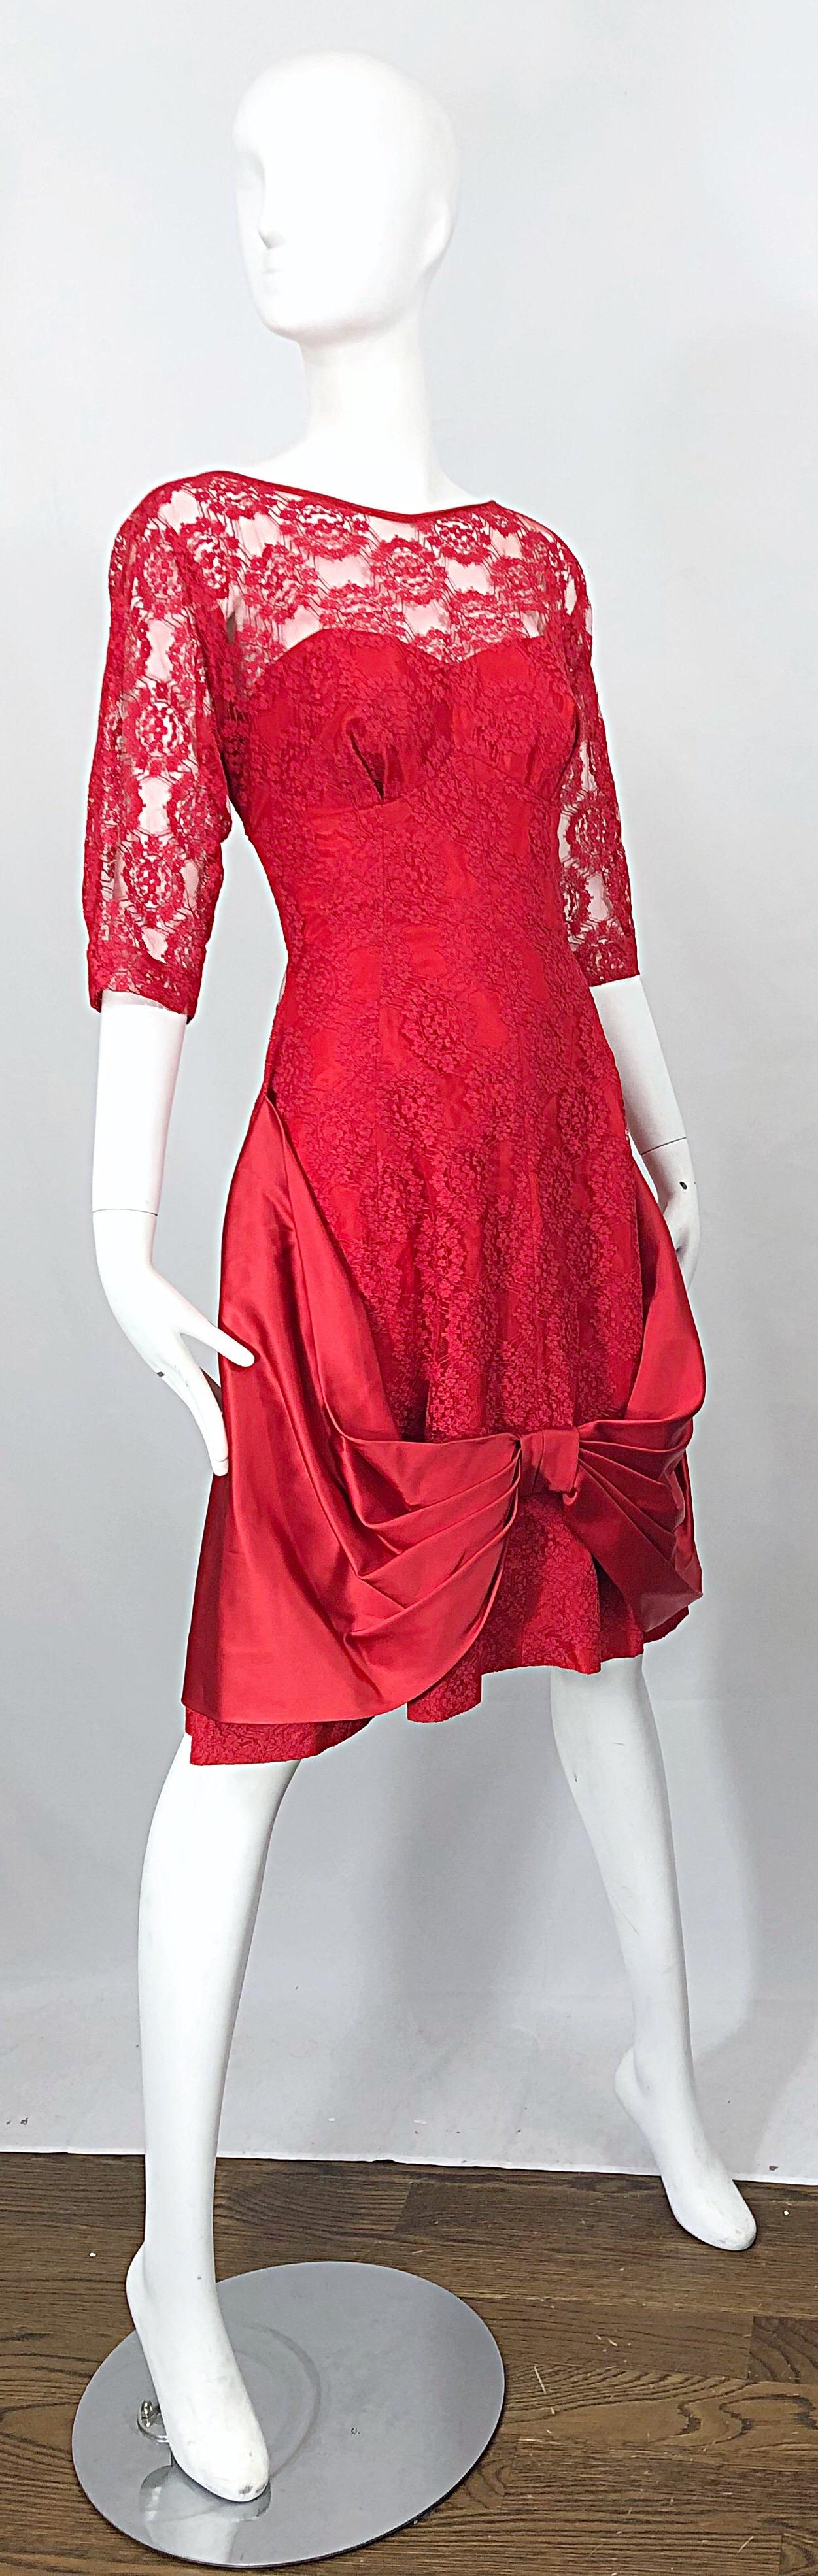 1950s Demi Couture Lips Stick Red Silk Lace 3/4 Sleeve Vintage 50s Dress For Sale 2